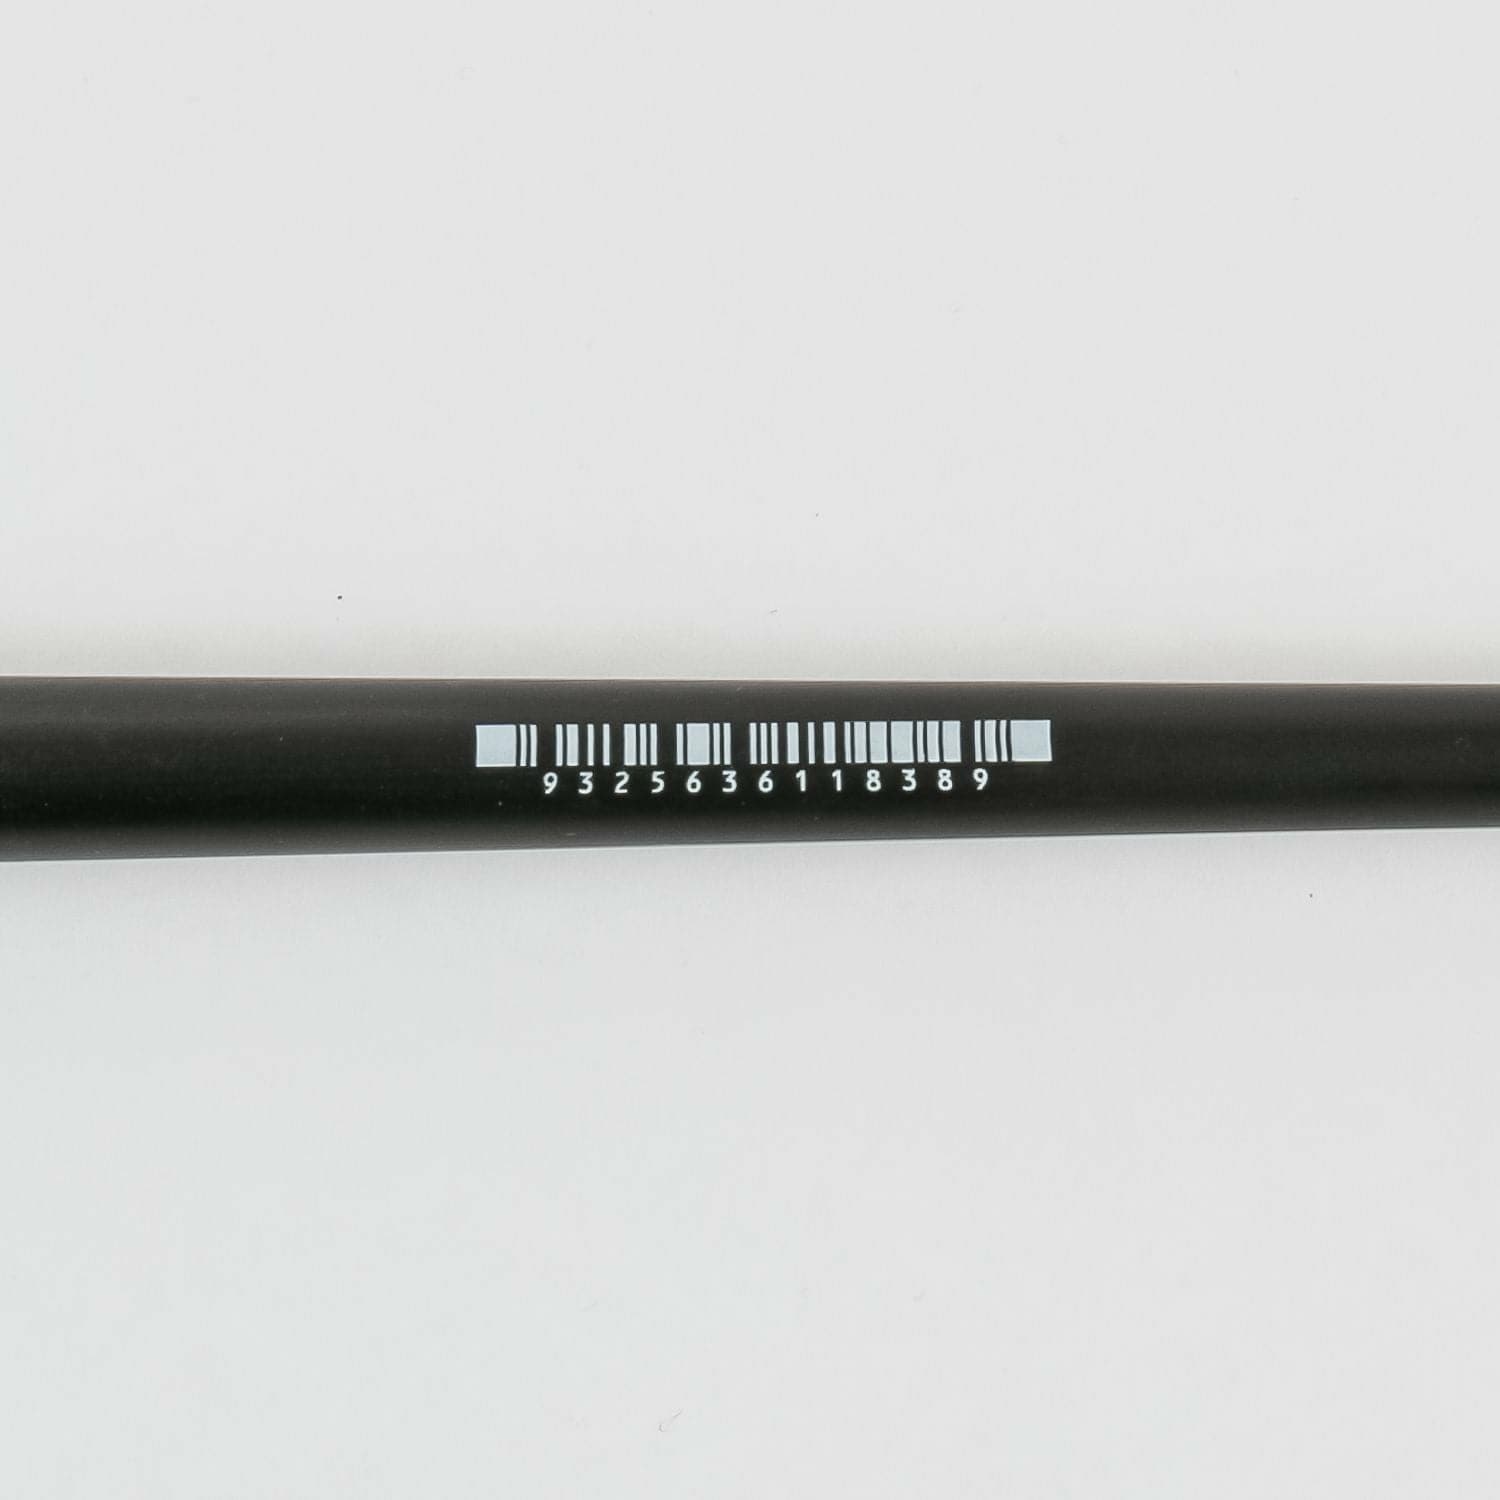 Discover a World of Endless Possibilities and Artist First Choice Brush Fan  Hog Hair Size 14 637